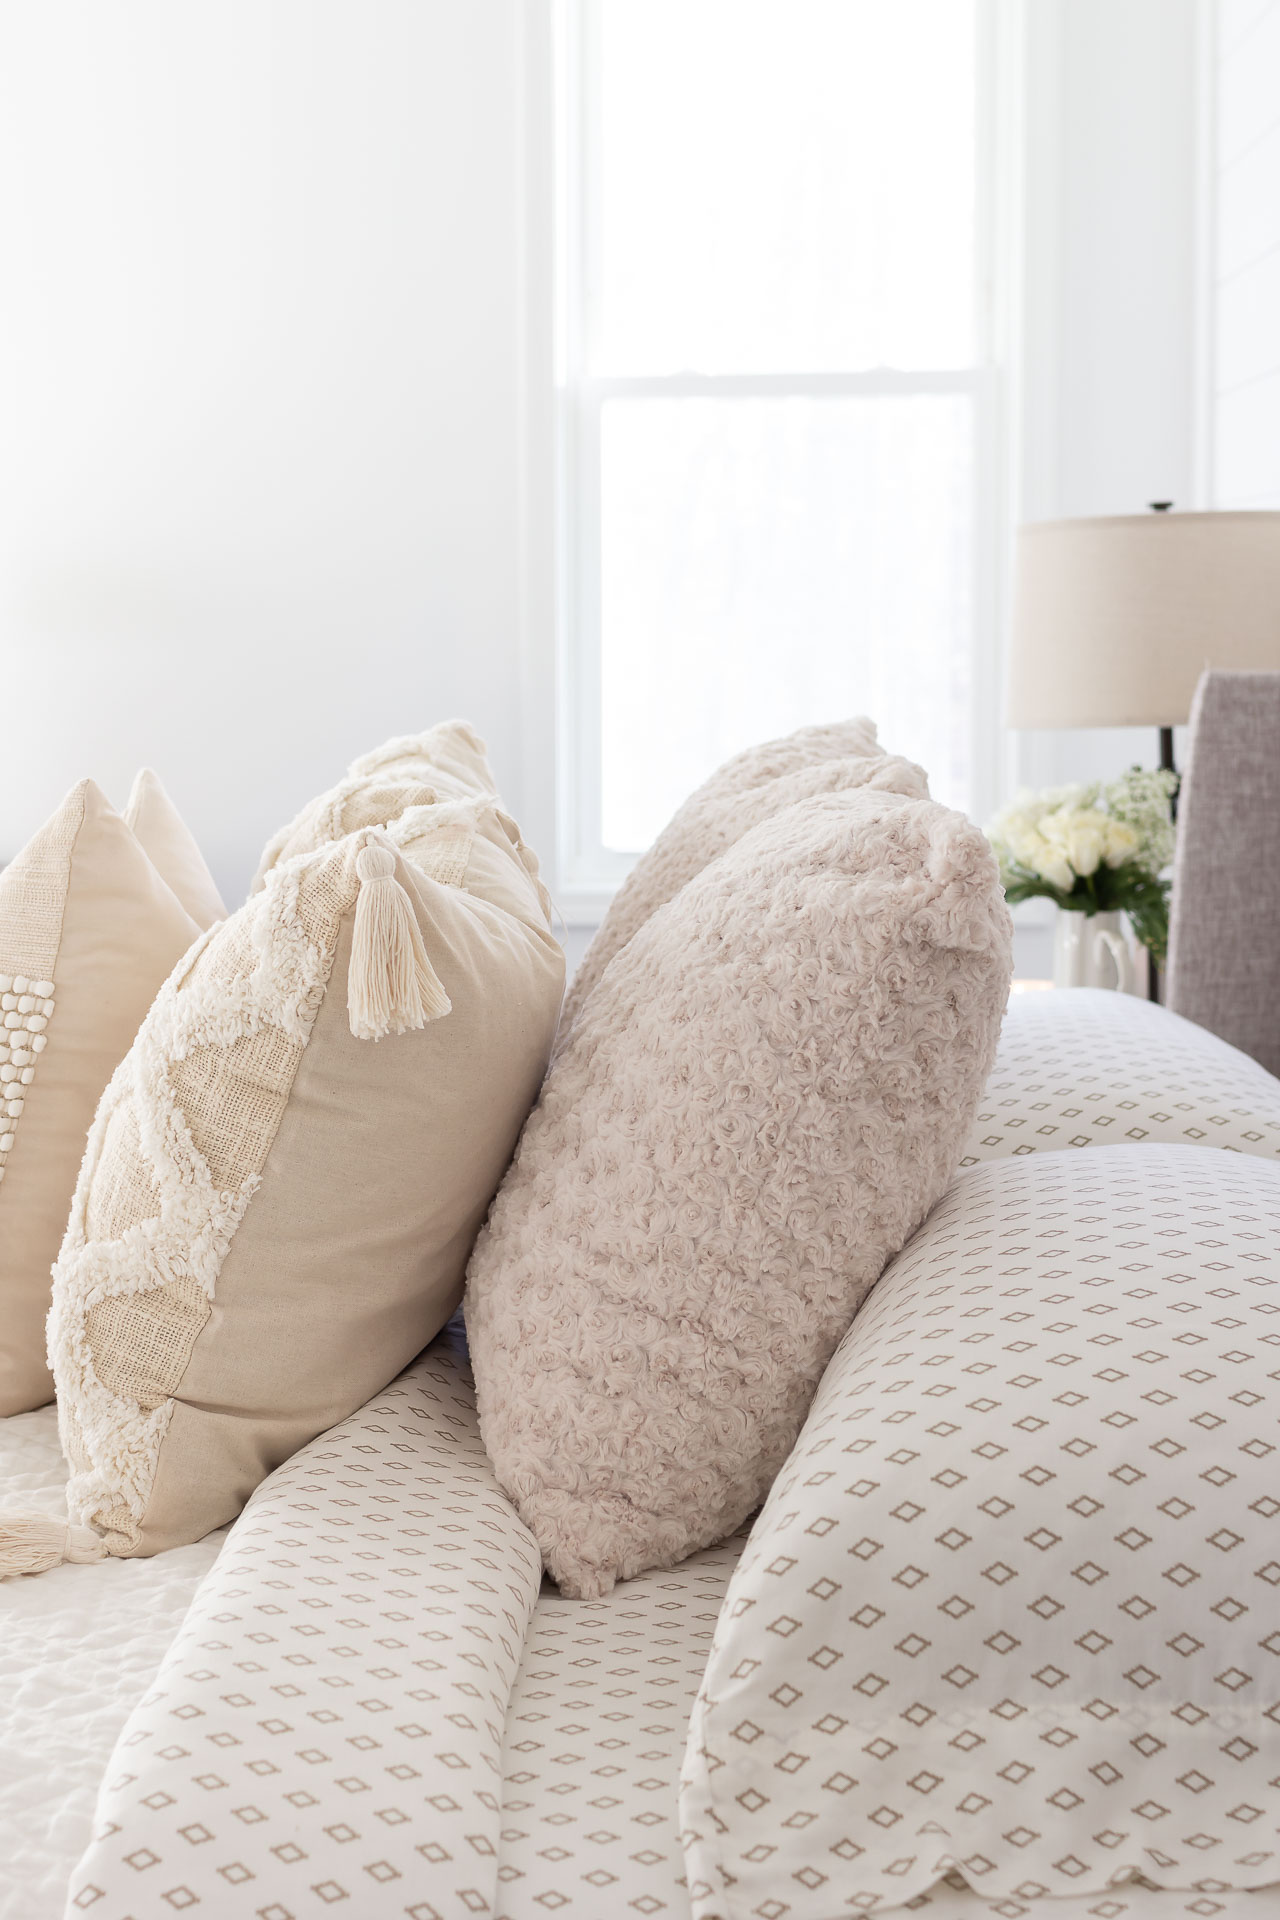 Adding Interest to Layered Neutral Bedding - On Sutton Place